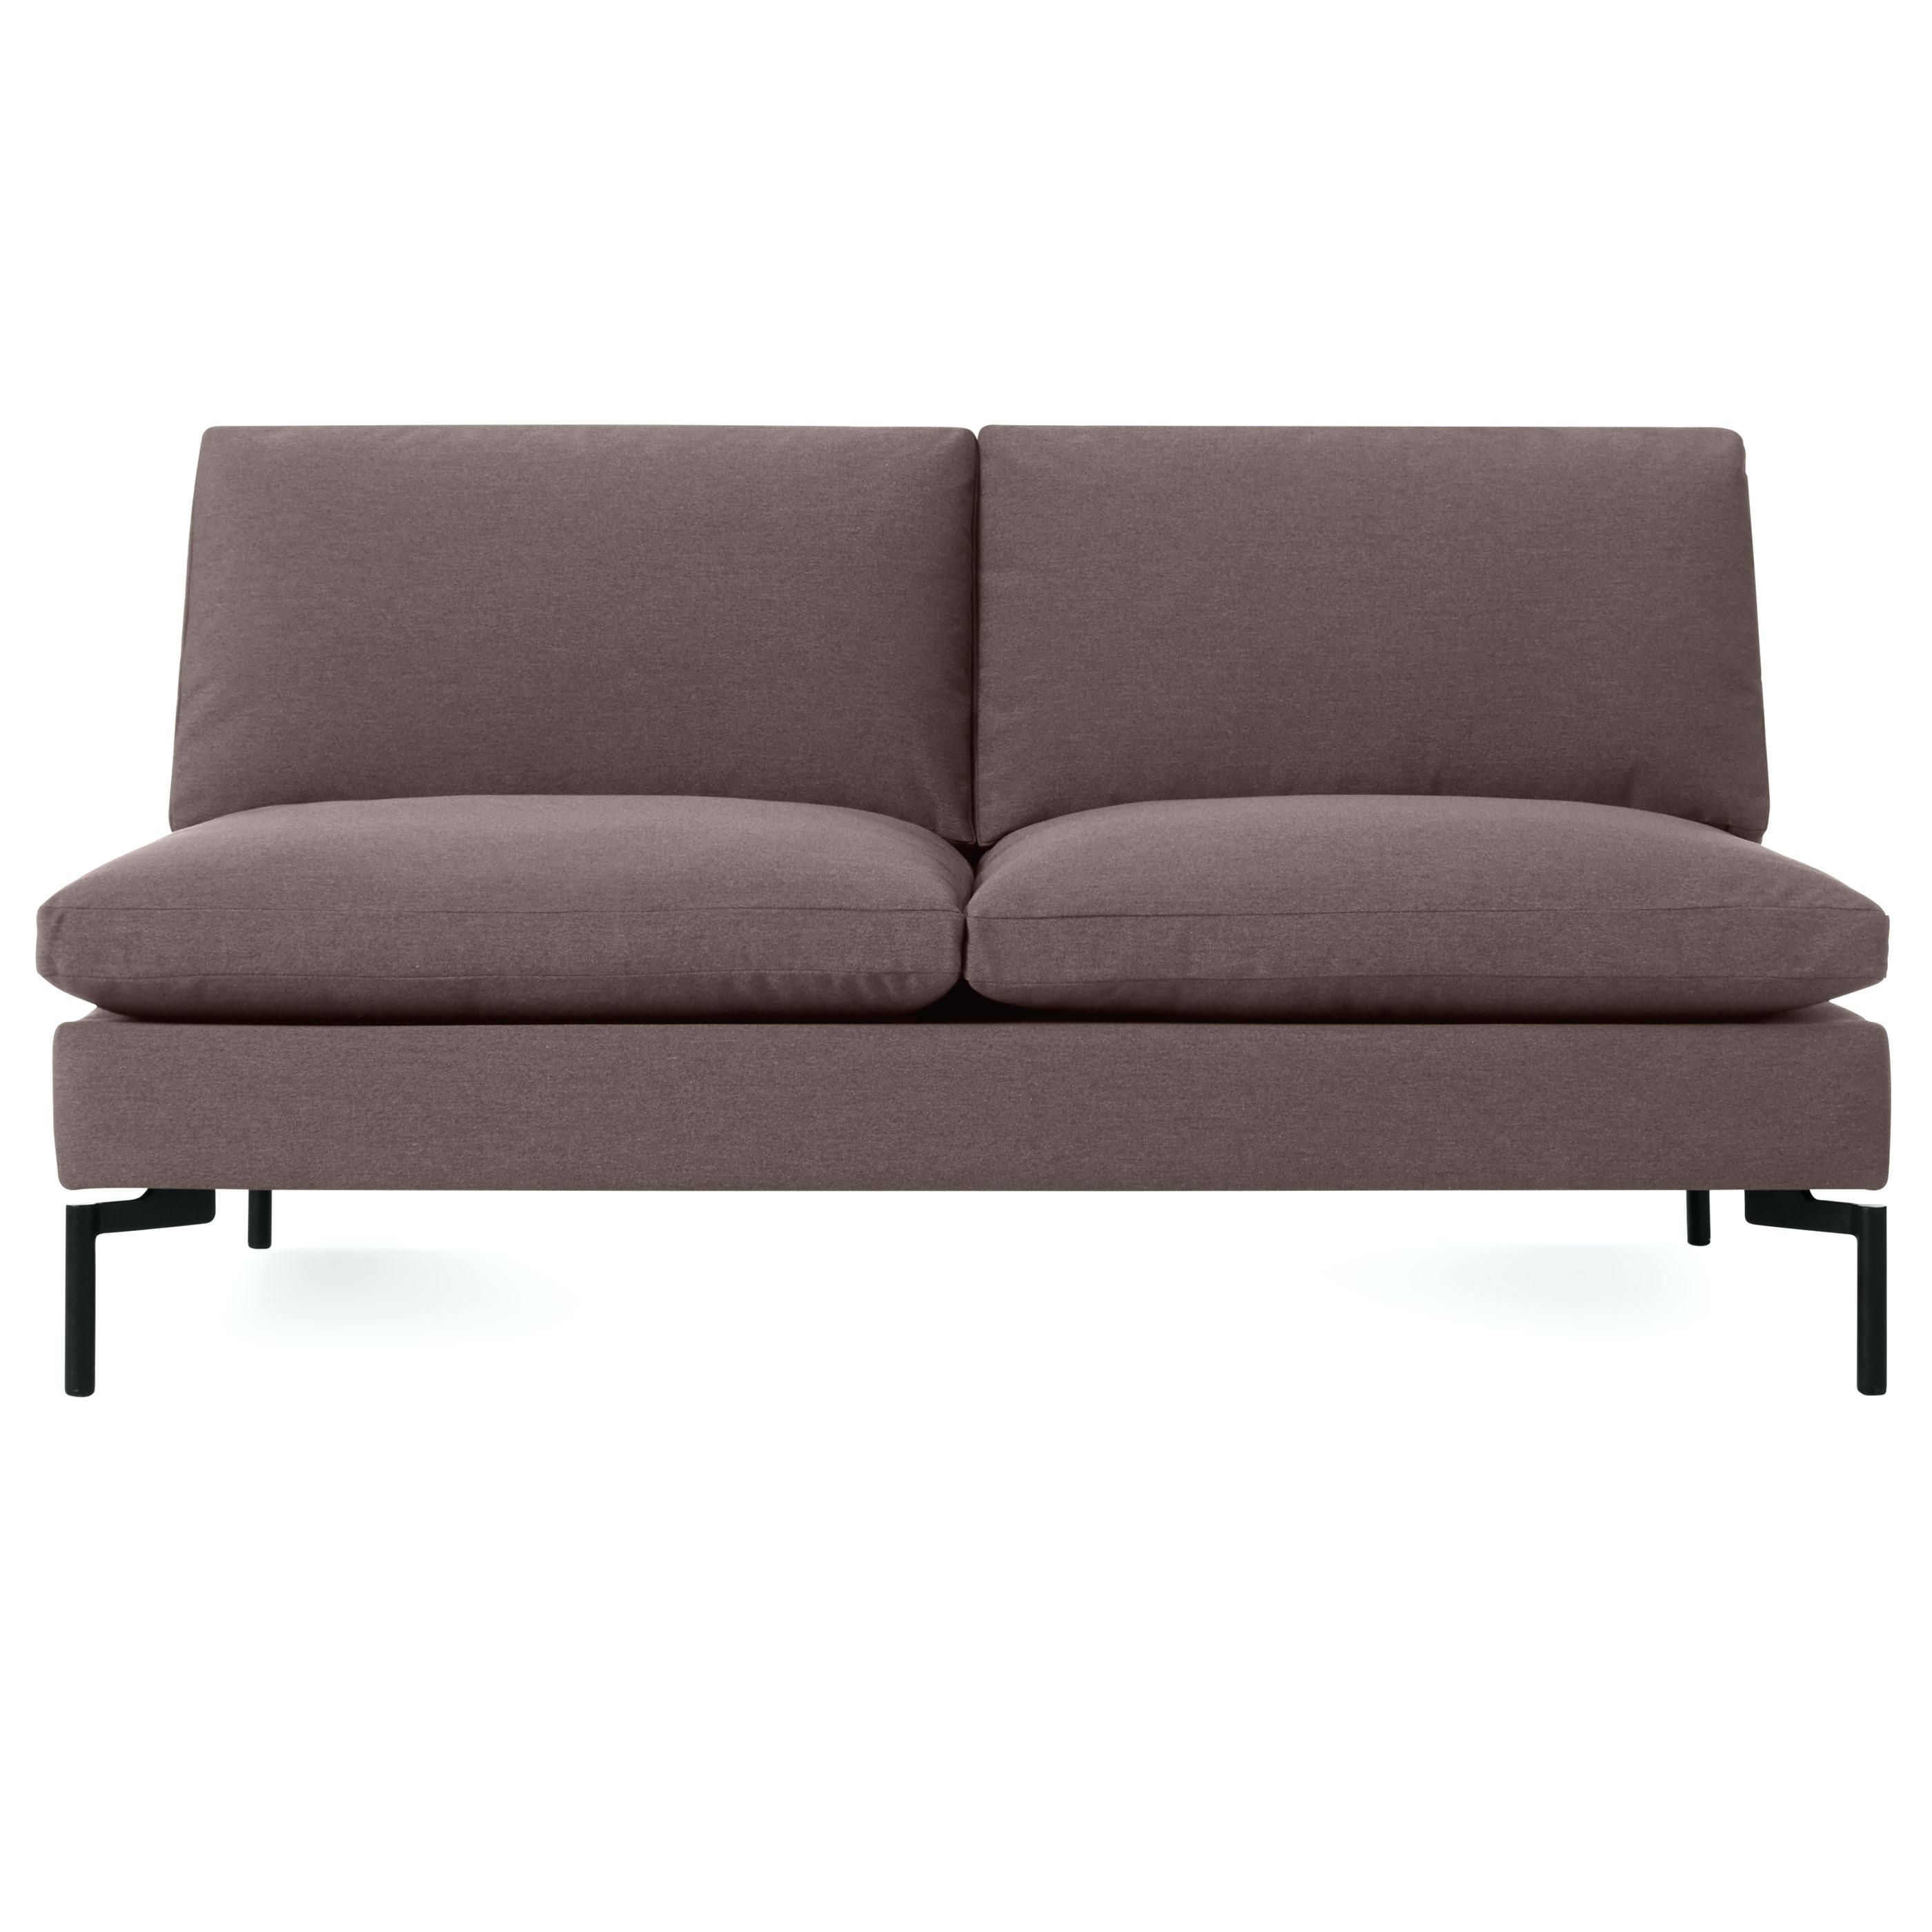 Small Armless Sofas Throughout Favorite Armless Sofas Sectional For Small Spaces Sofa Bed Australia Sale (View 4 of 20)